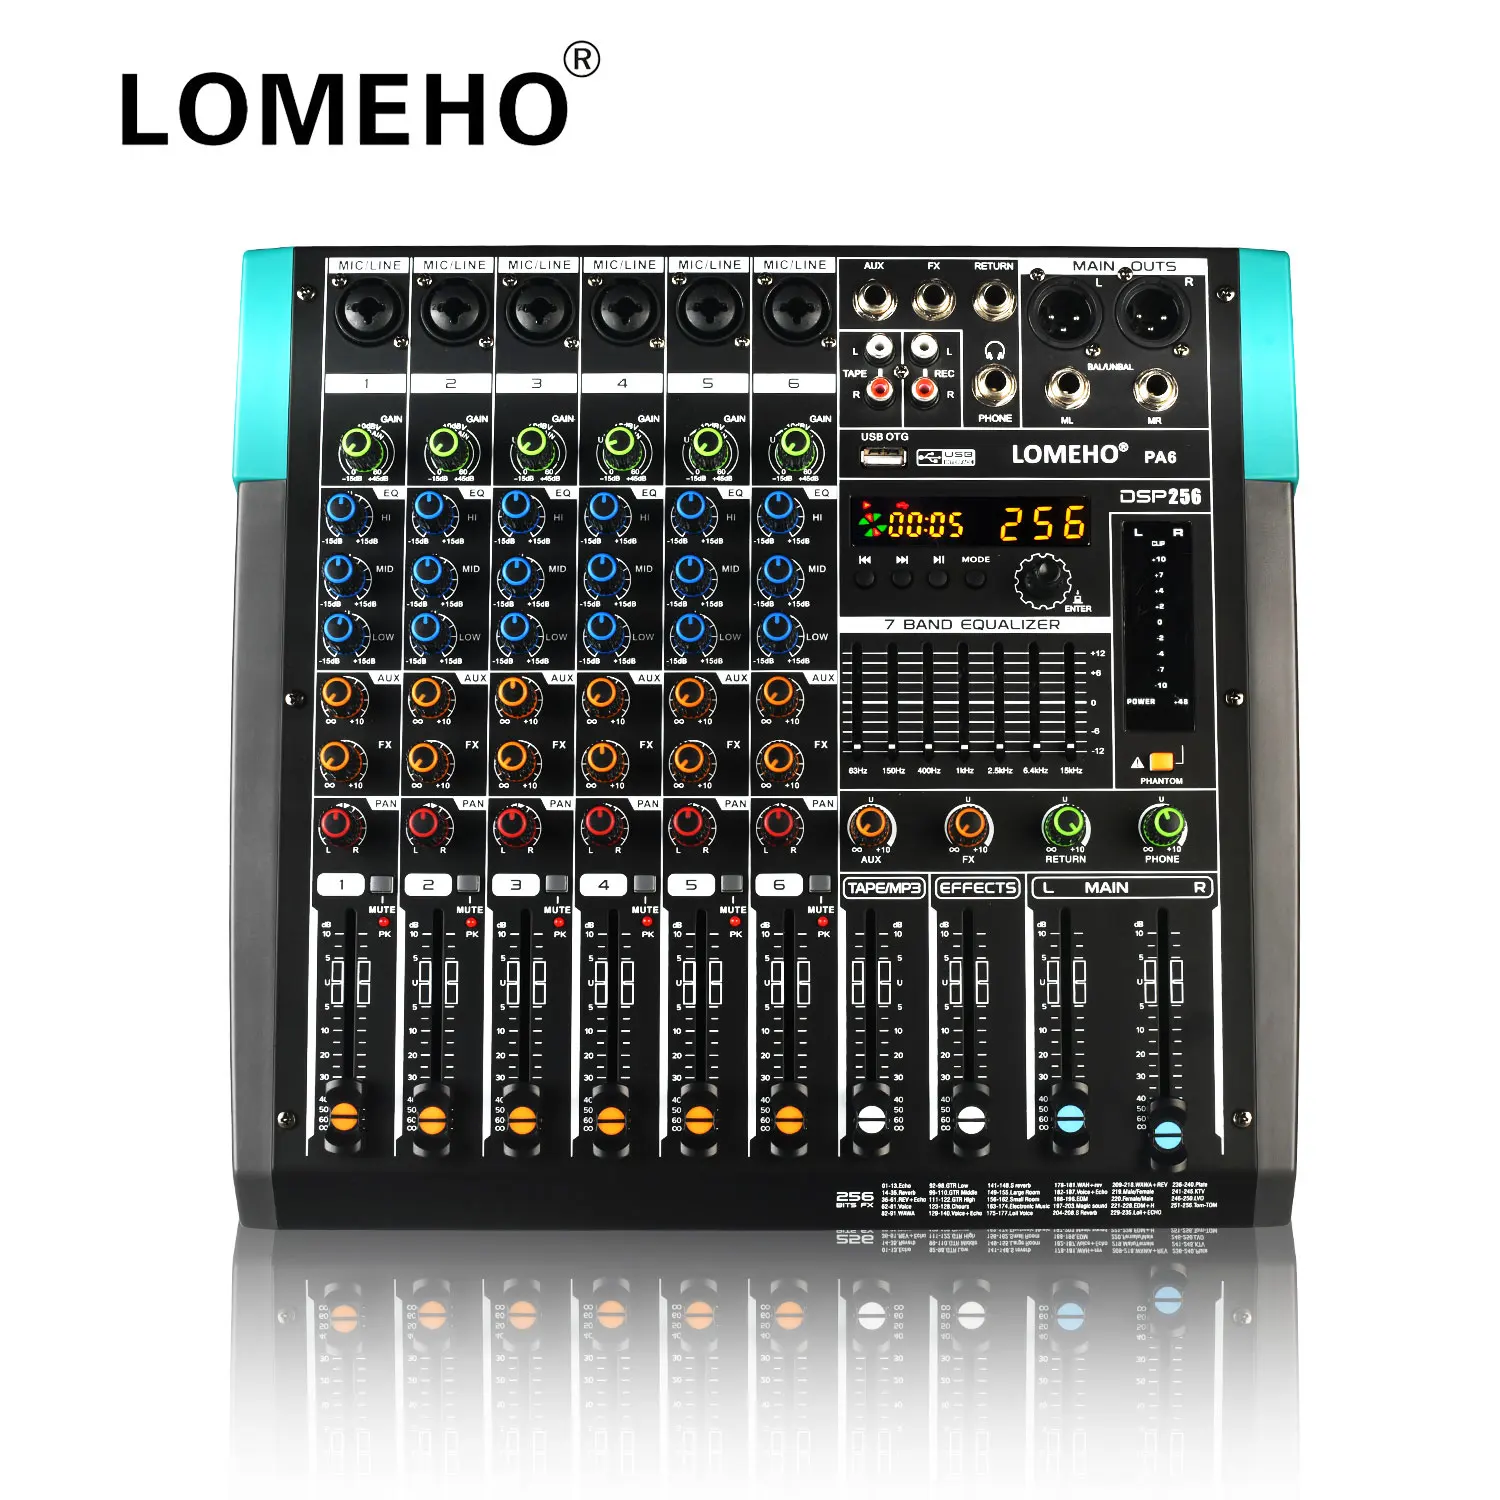 

LOMEHO 256 Digital Effects Mixing Console 6 Channels 7 Band EQ Bluetooth Sound Table 48V USB PC Play Record DJ Audio Mixer PA6